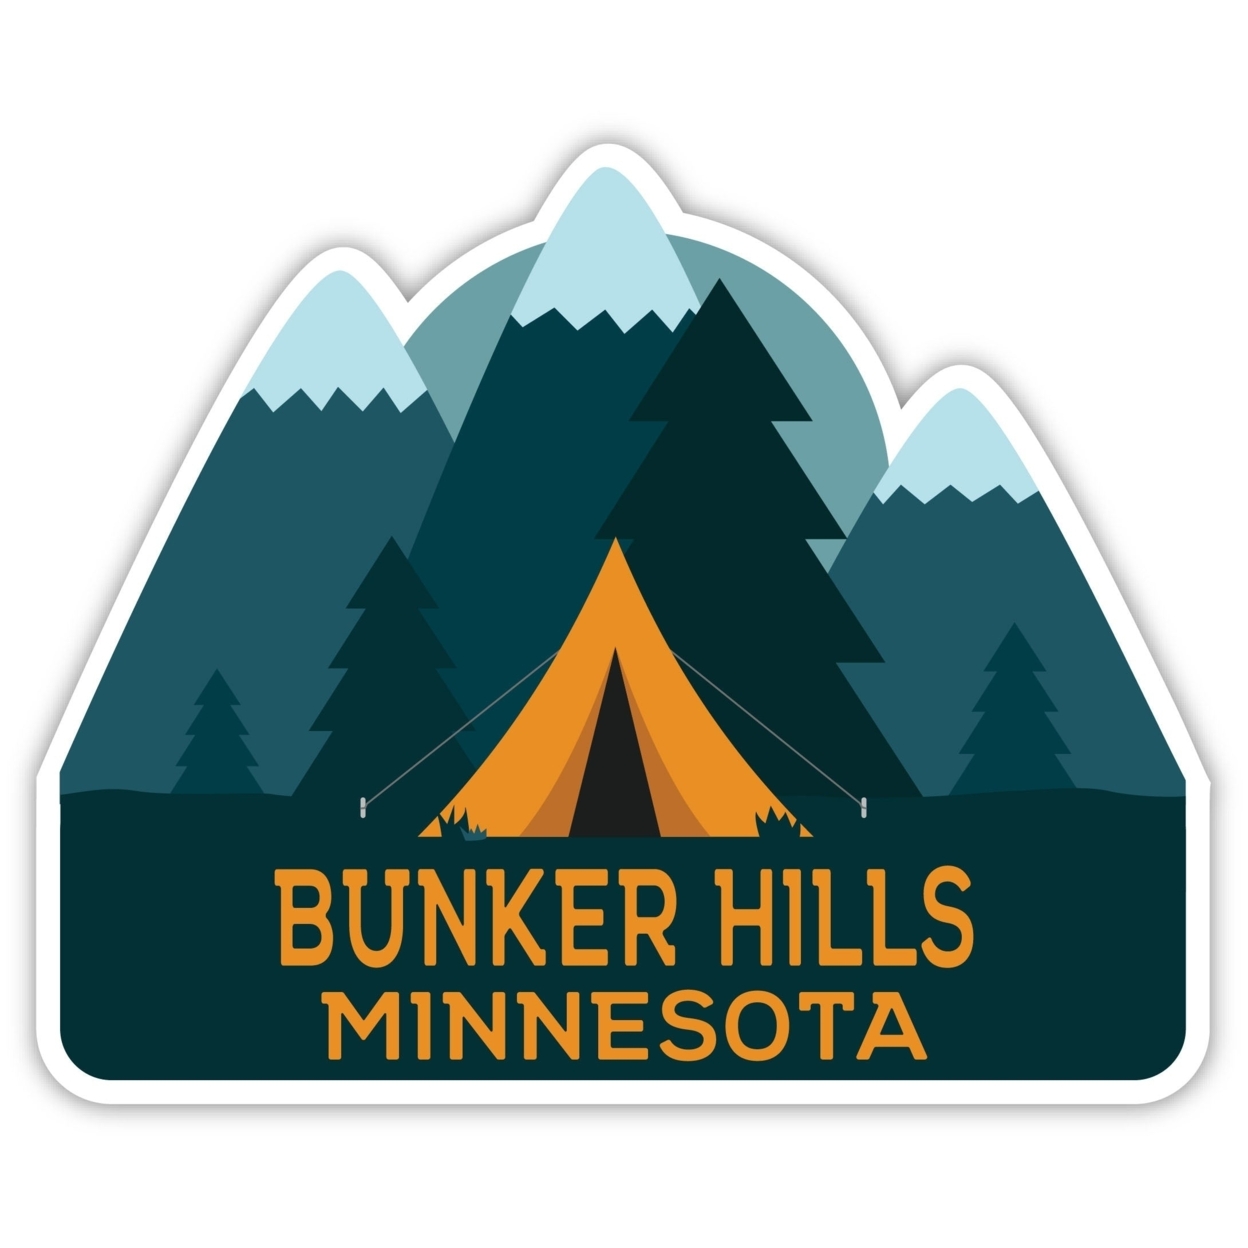 Bunker Hills Minnesota Souvenir Decorative Stickers (Choose Theme And Size) - 4-Pack, 12-Inch, Tent